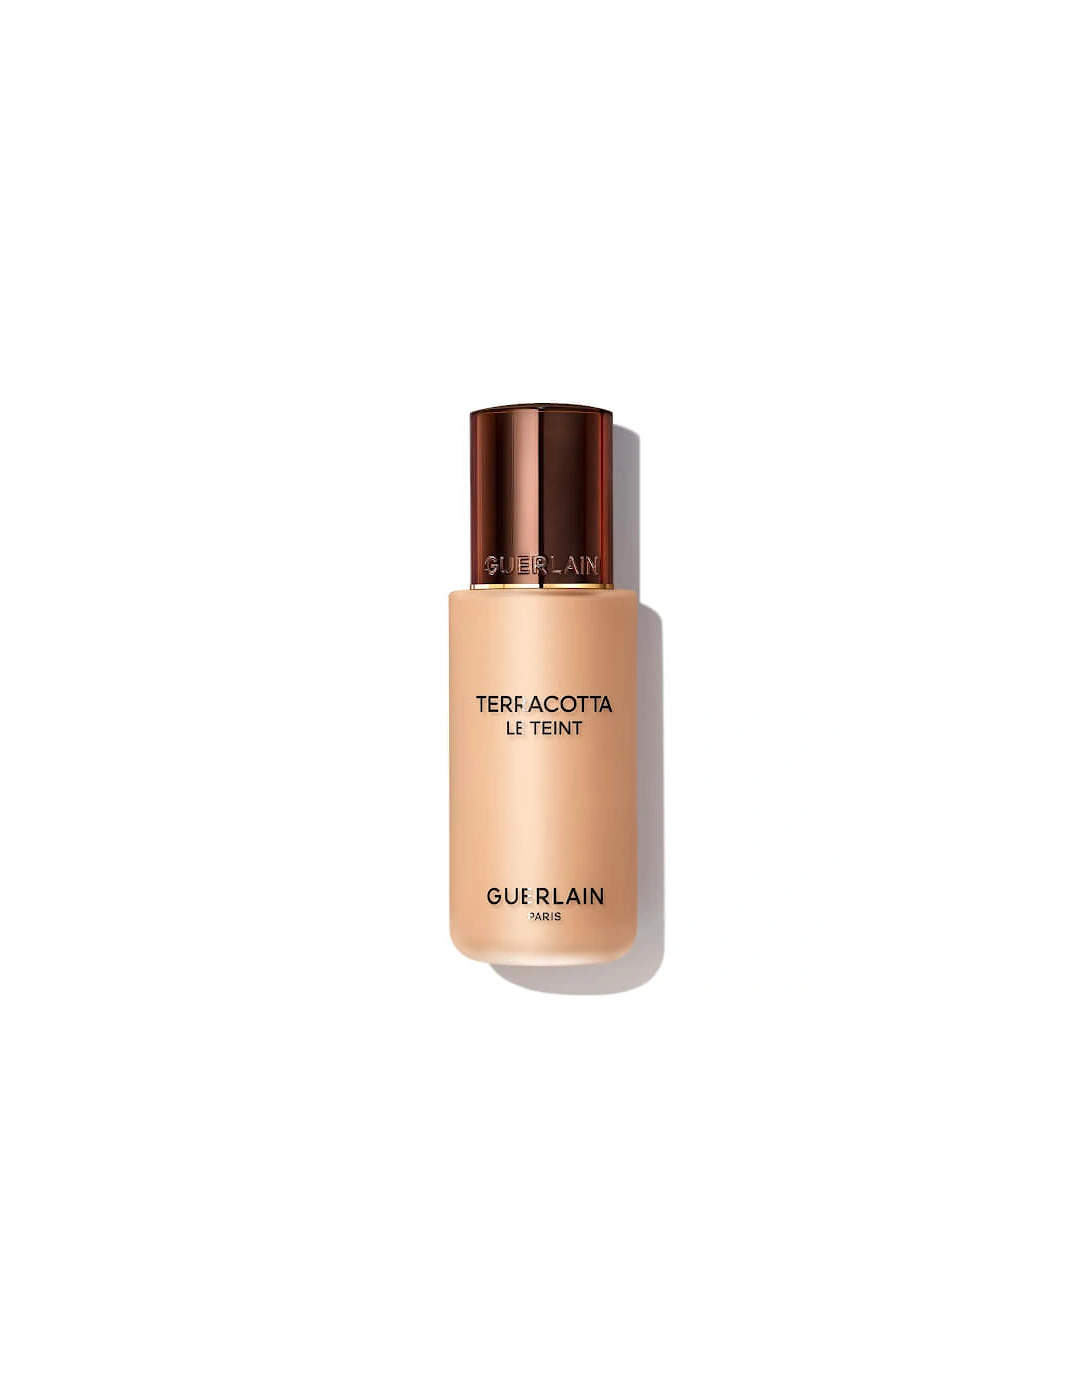 Terracotta Le Teint Healthy Glow Natural Perfection Foundation - 3.5W, 2 of 1